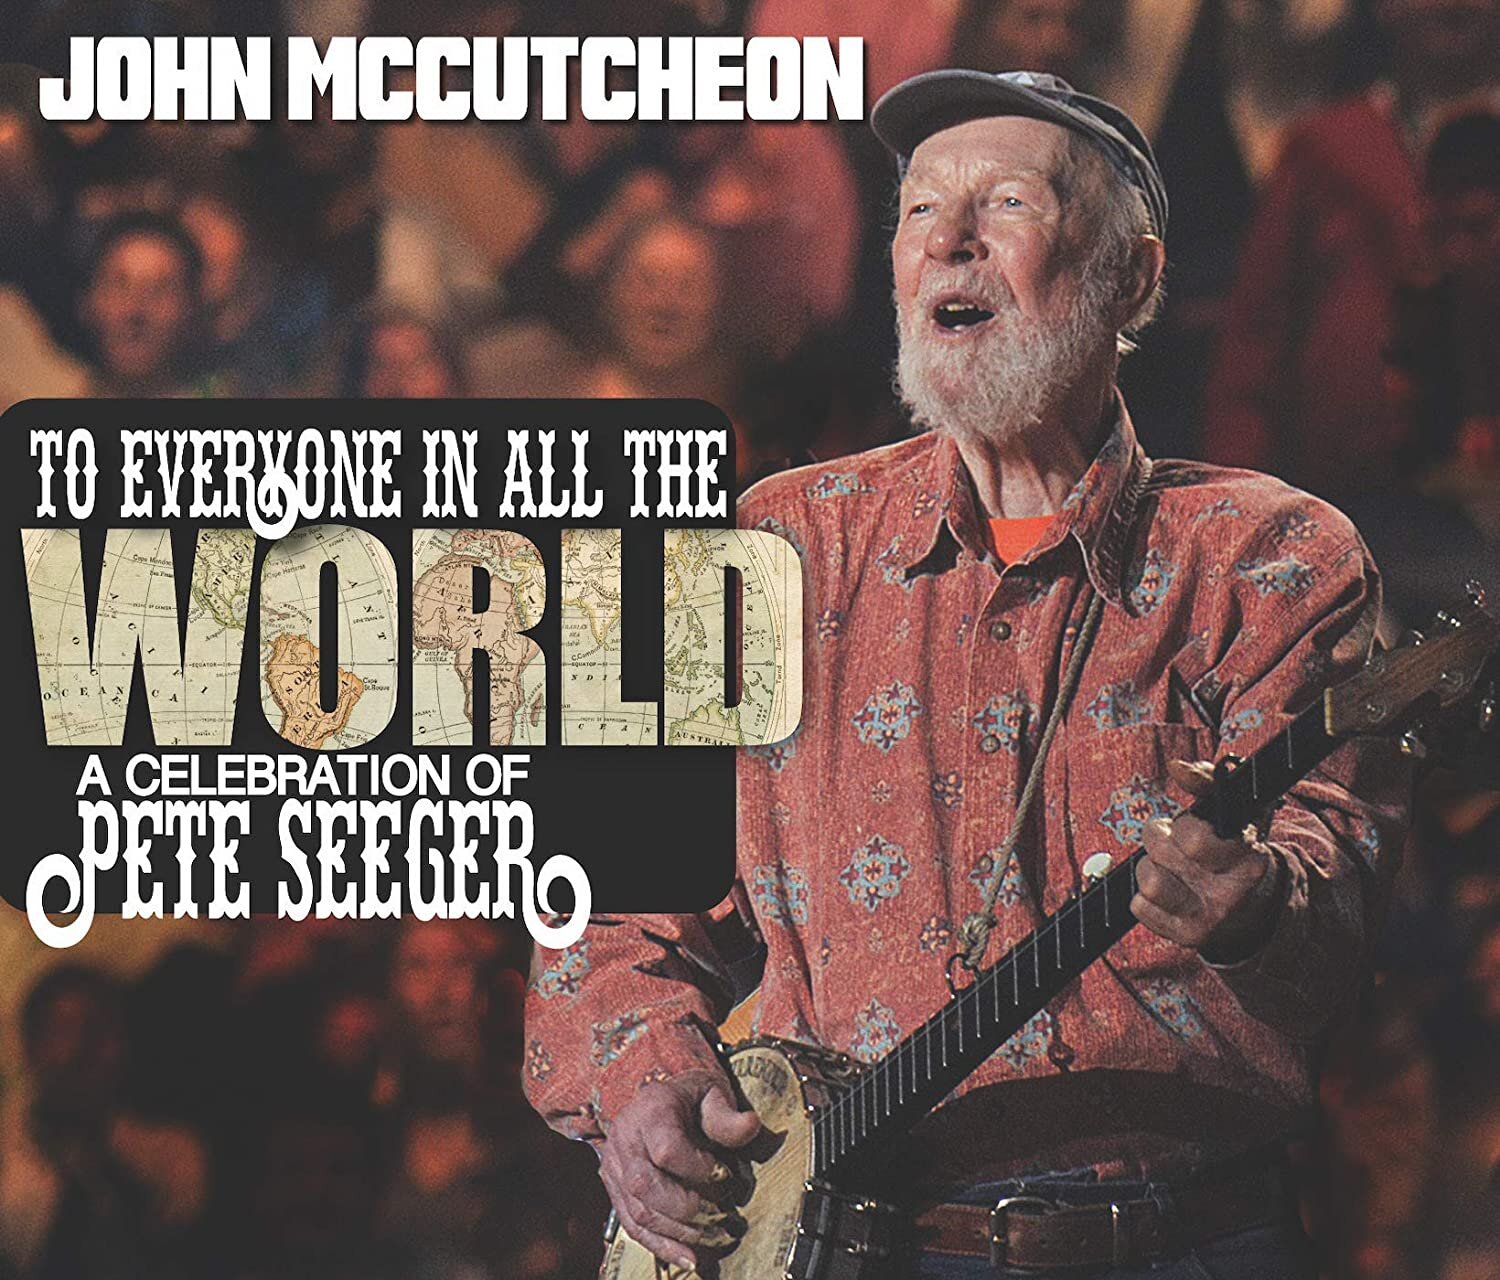 <b>John McCutcheon</b></br>To Everyone In All the World A Celebration of Pete Seeger</br><I><small>Stereo Master</small></i>